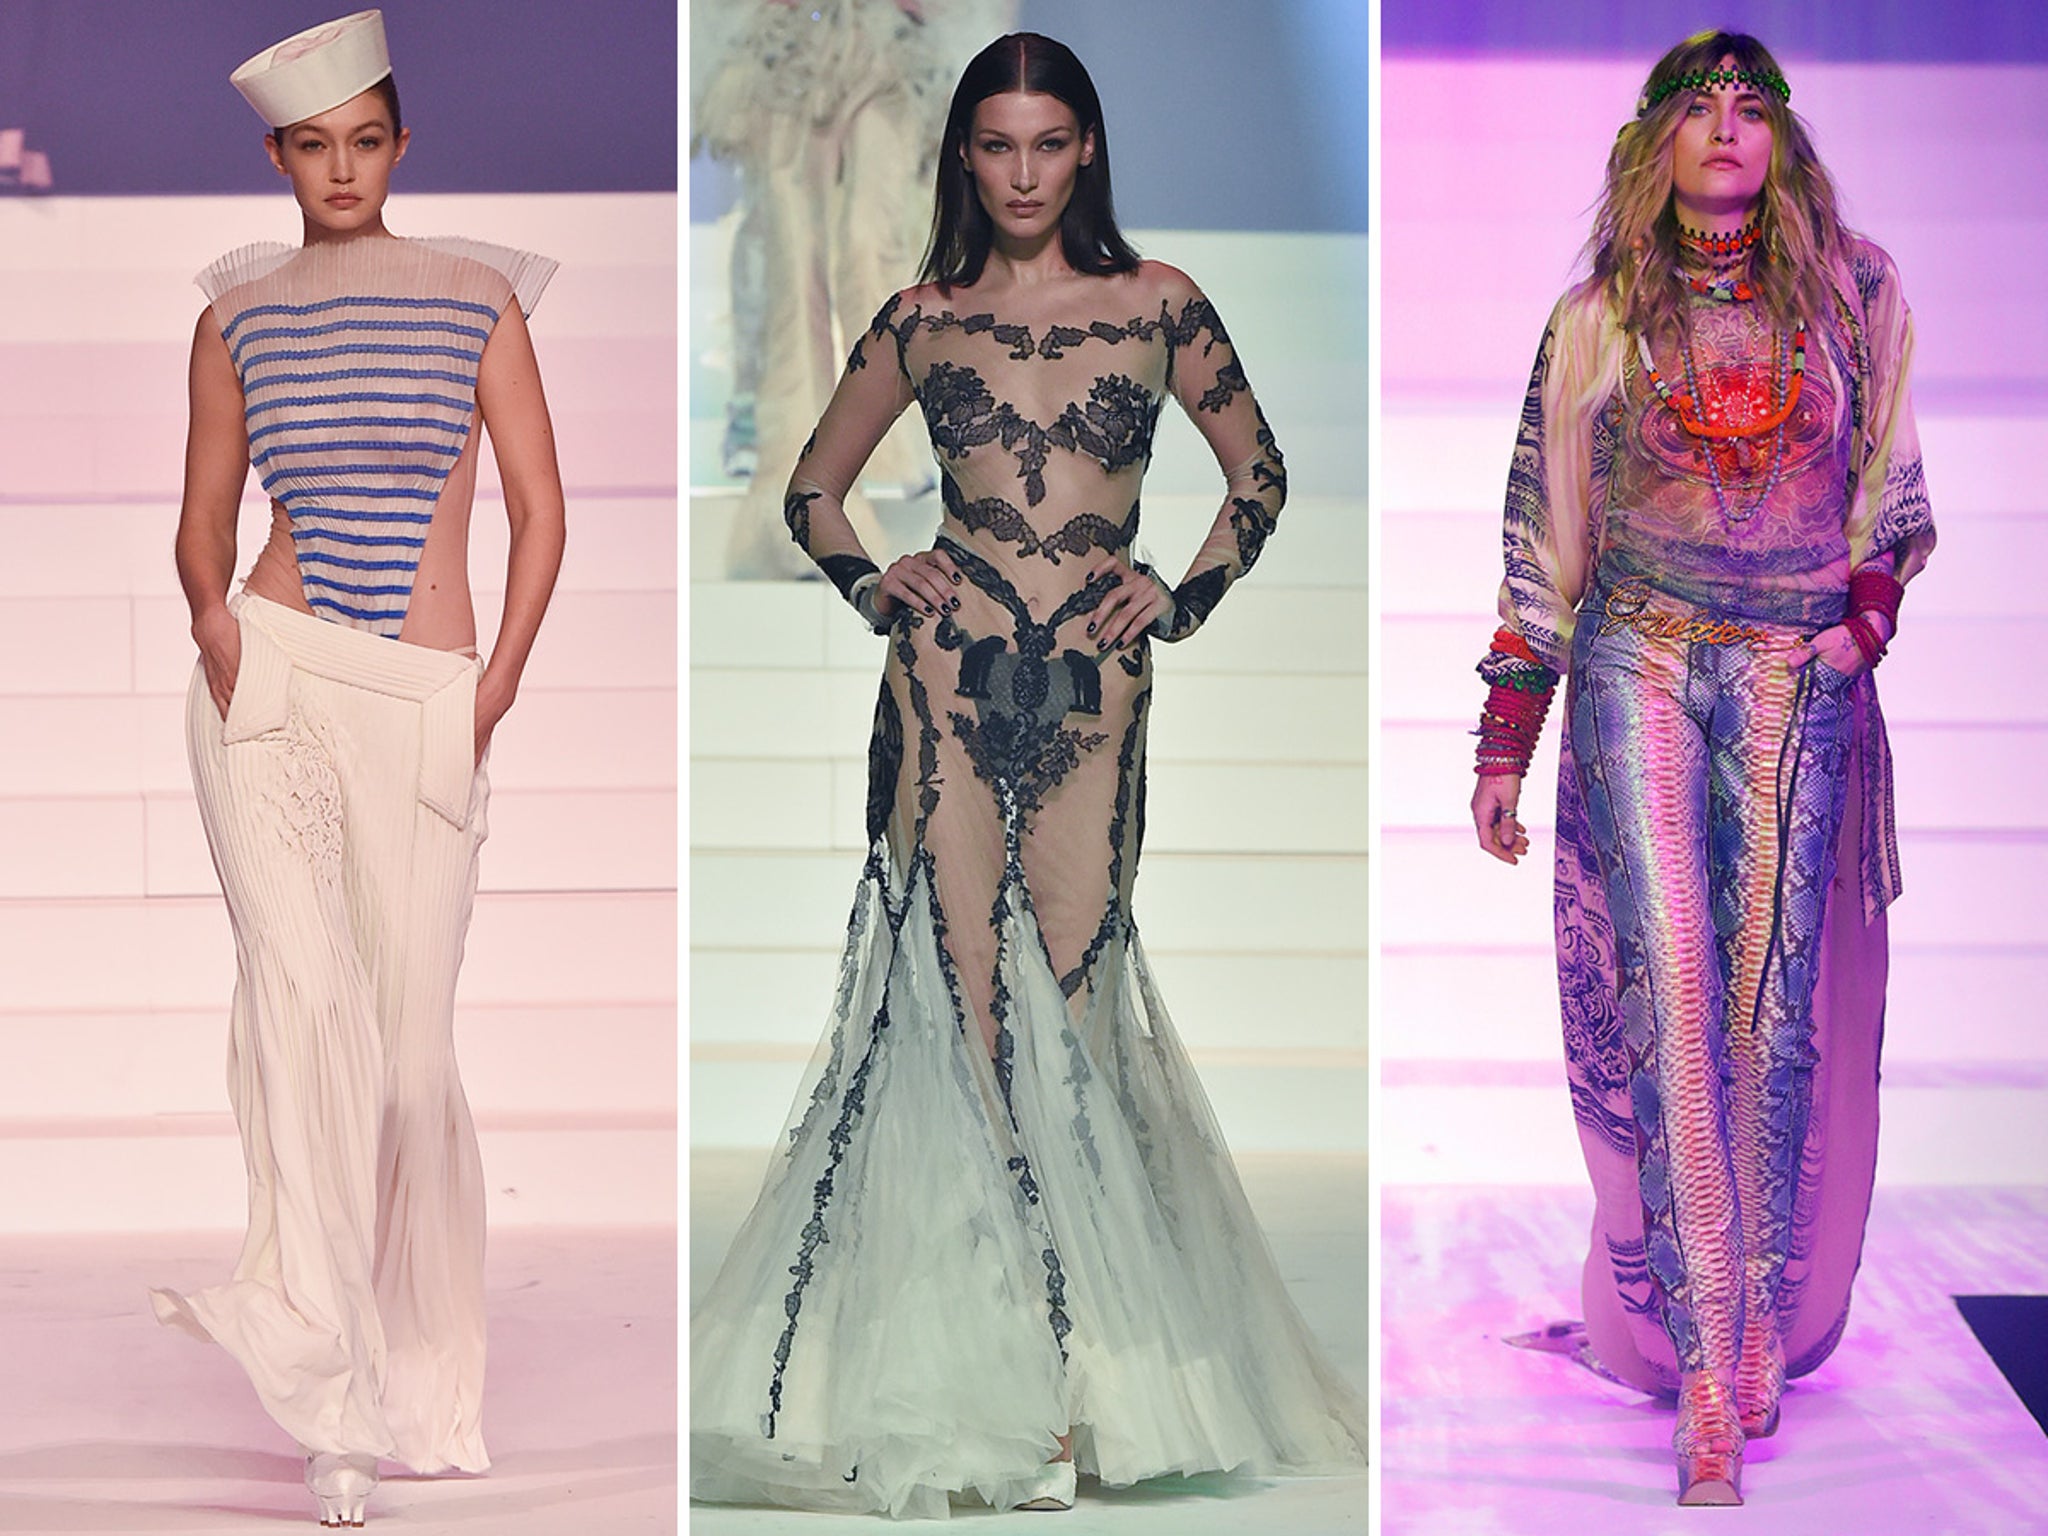 Photos from Jean-Paul Gaultier's Final Couture Show at Paris